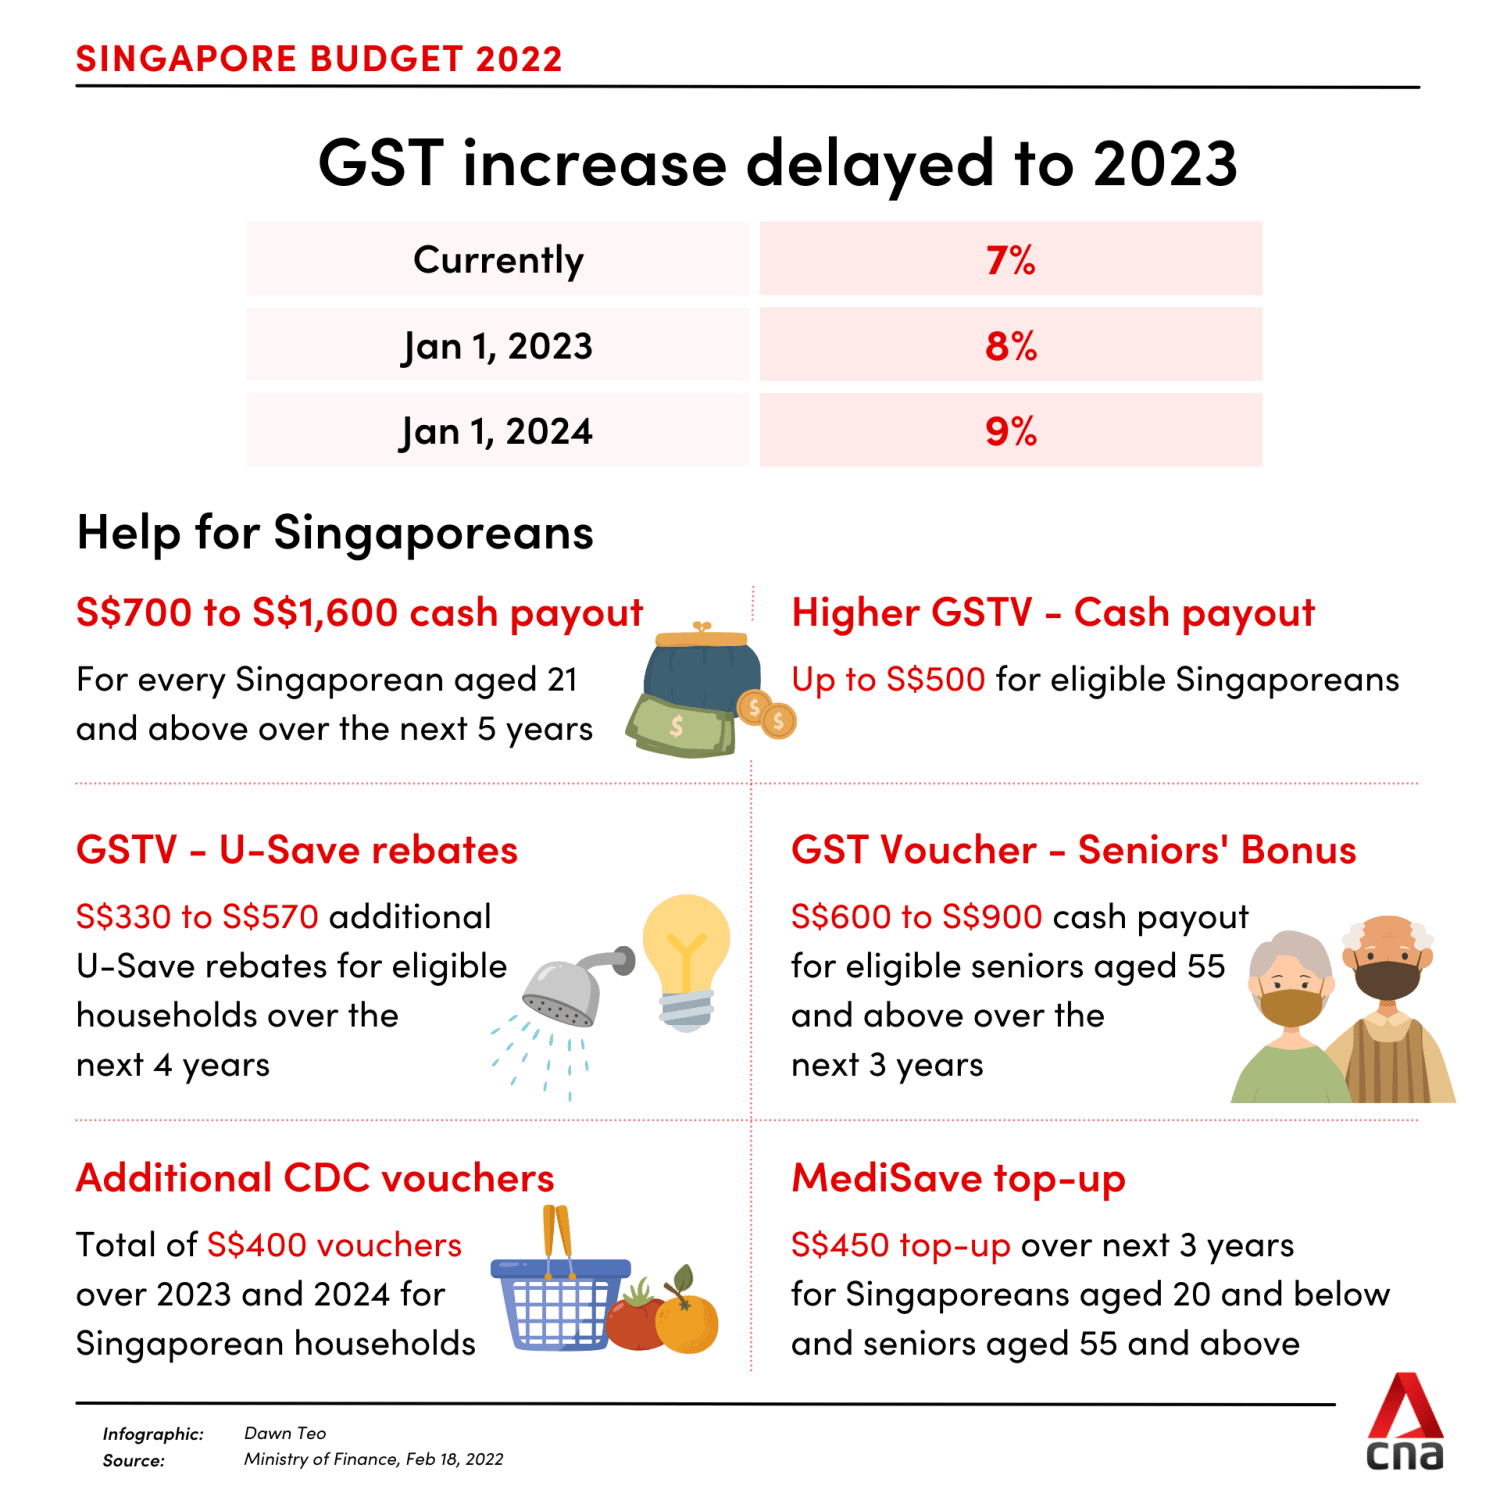 from-a-gst-hike-to-cdc-vouchers-9-things-you-need-to-know-about-budget-2022-cna